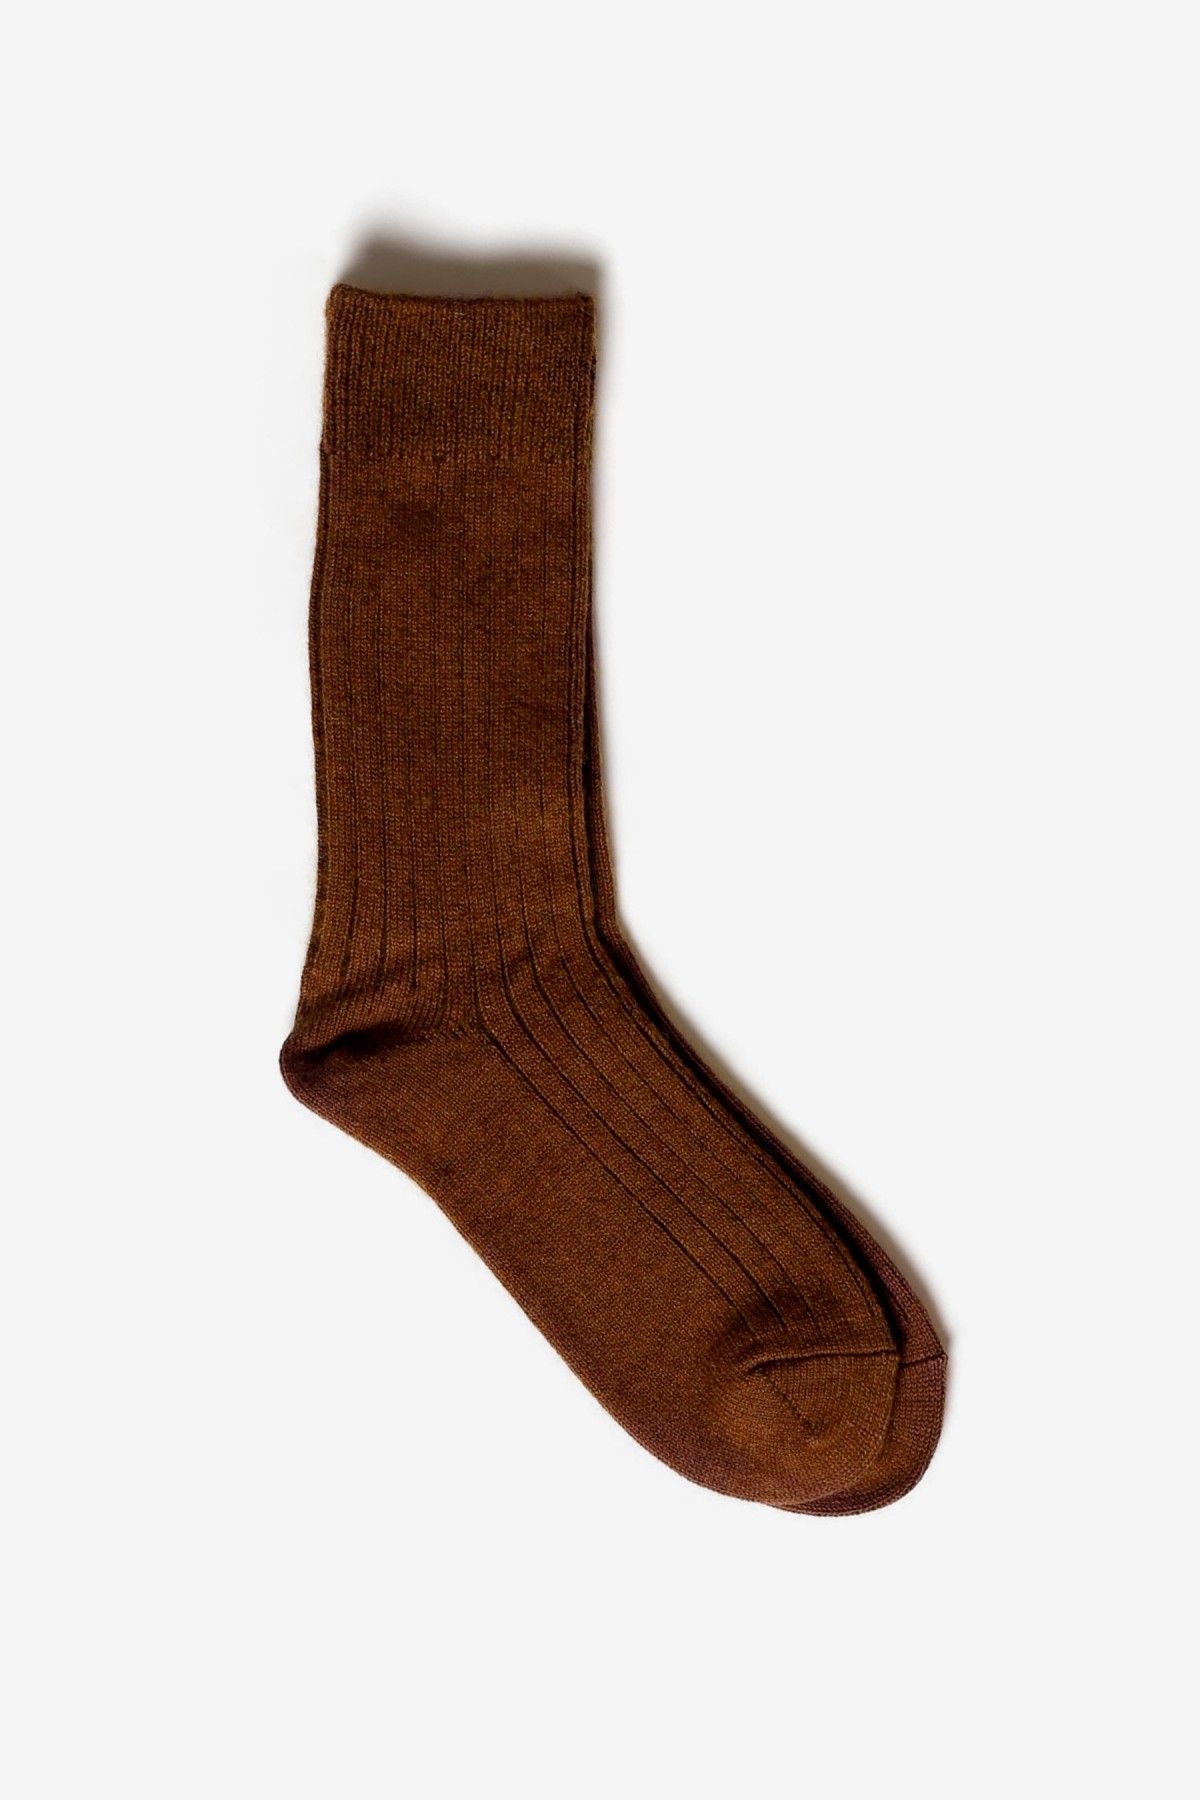 RoToTo Cotton Wool Ribbed Socks in O.D.